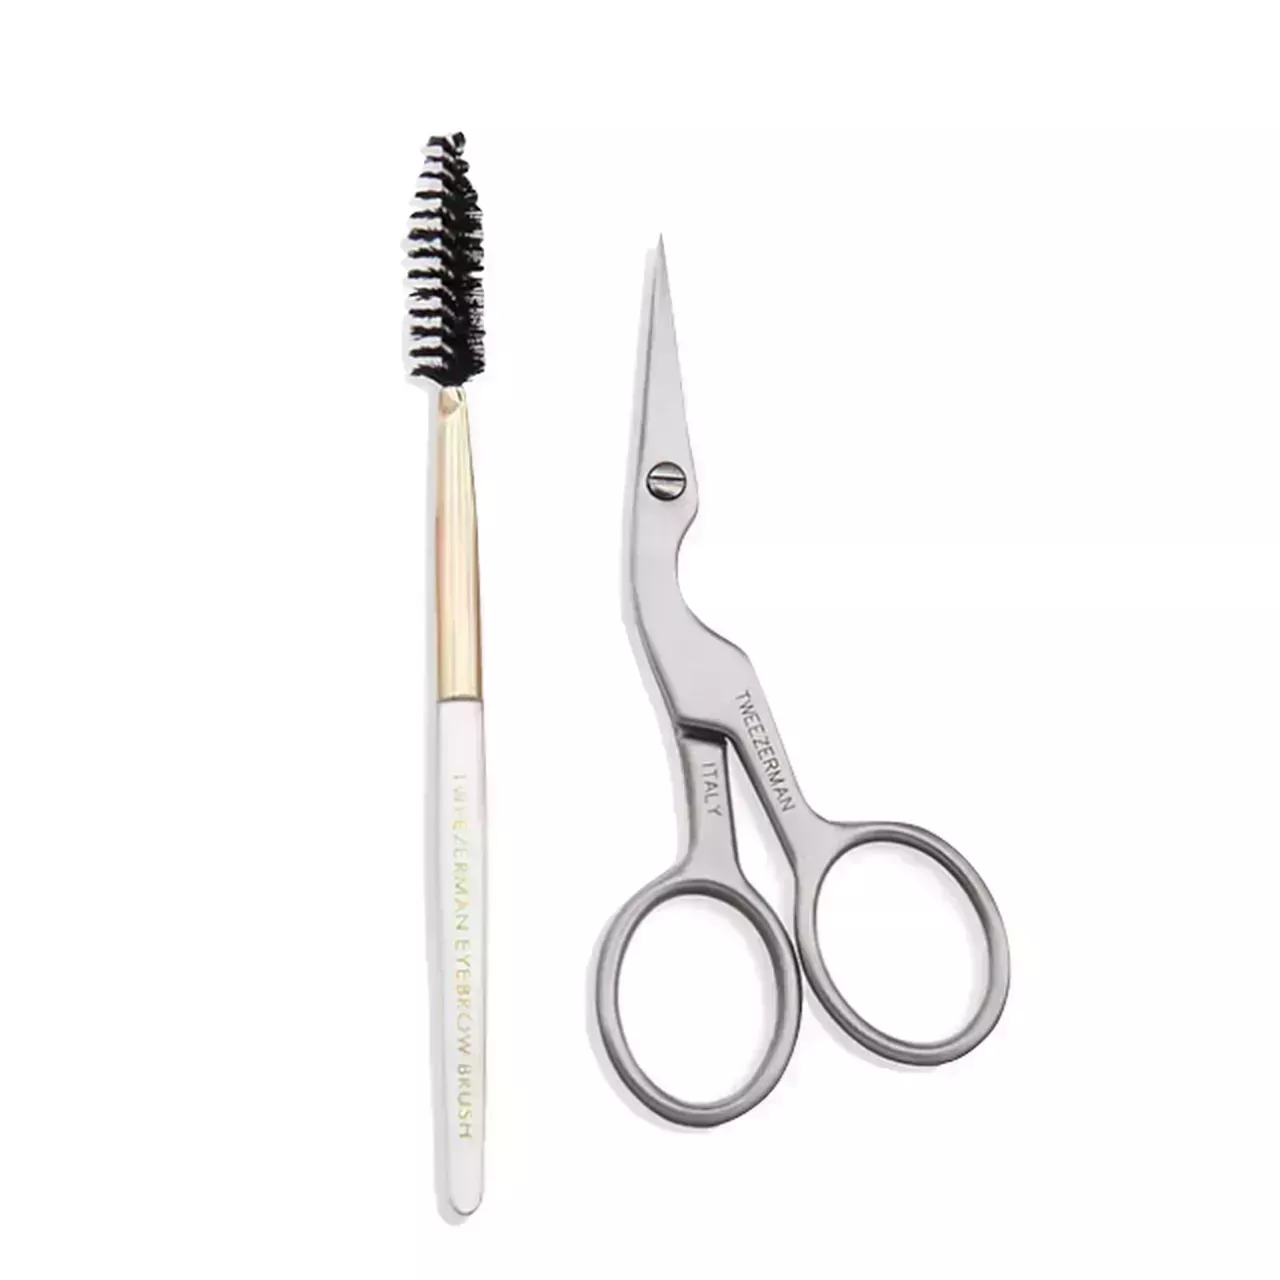 Tweezerman brow shaping scissors and spoolie on a white background